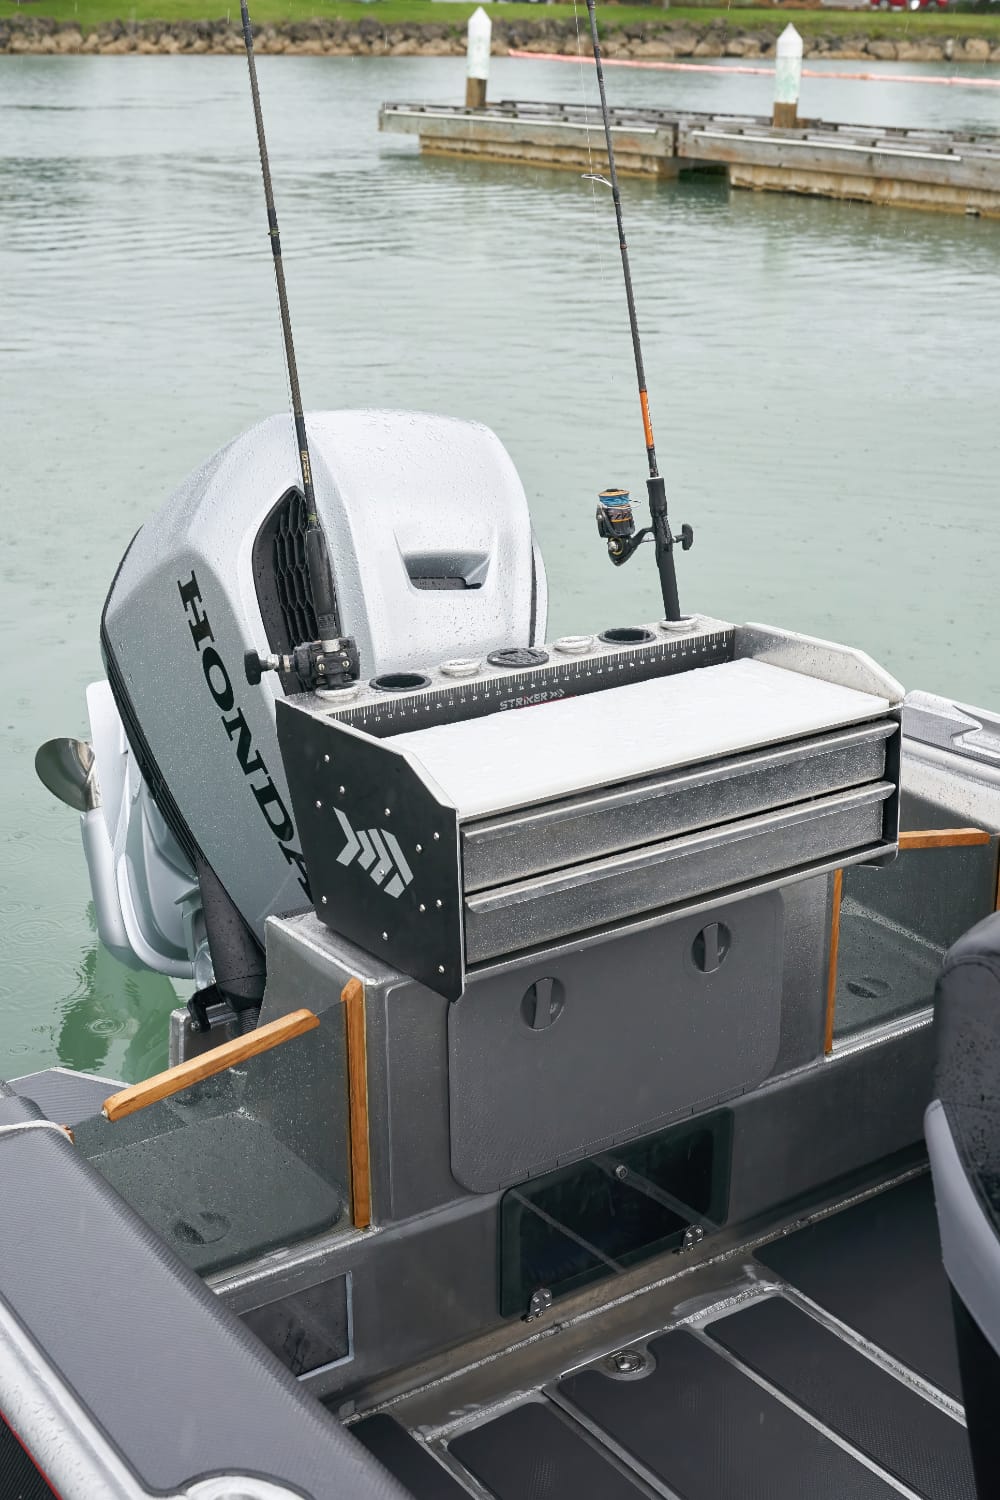 The AirCat 625 is Now Available for Demonstrations and Sea Trials